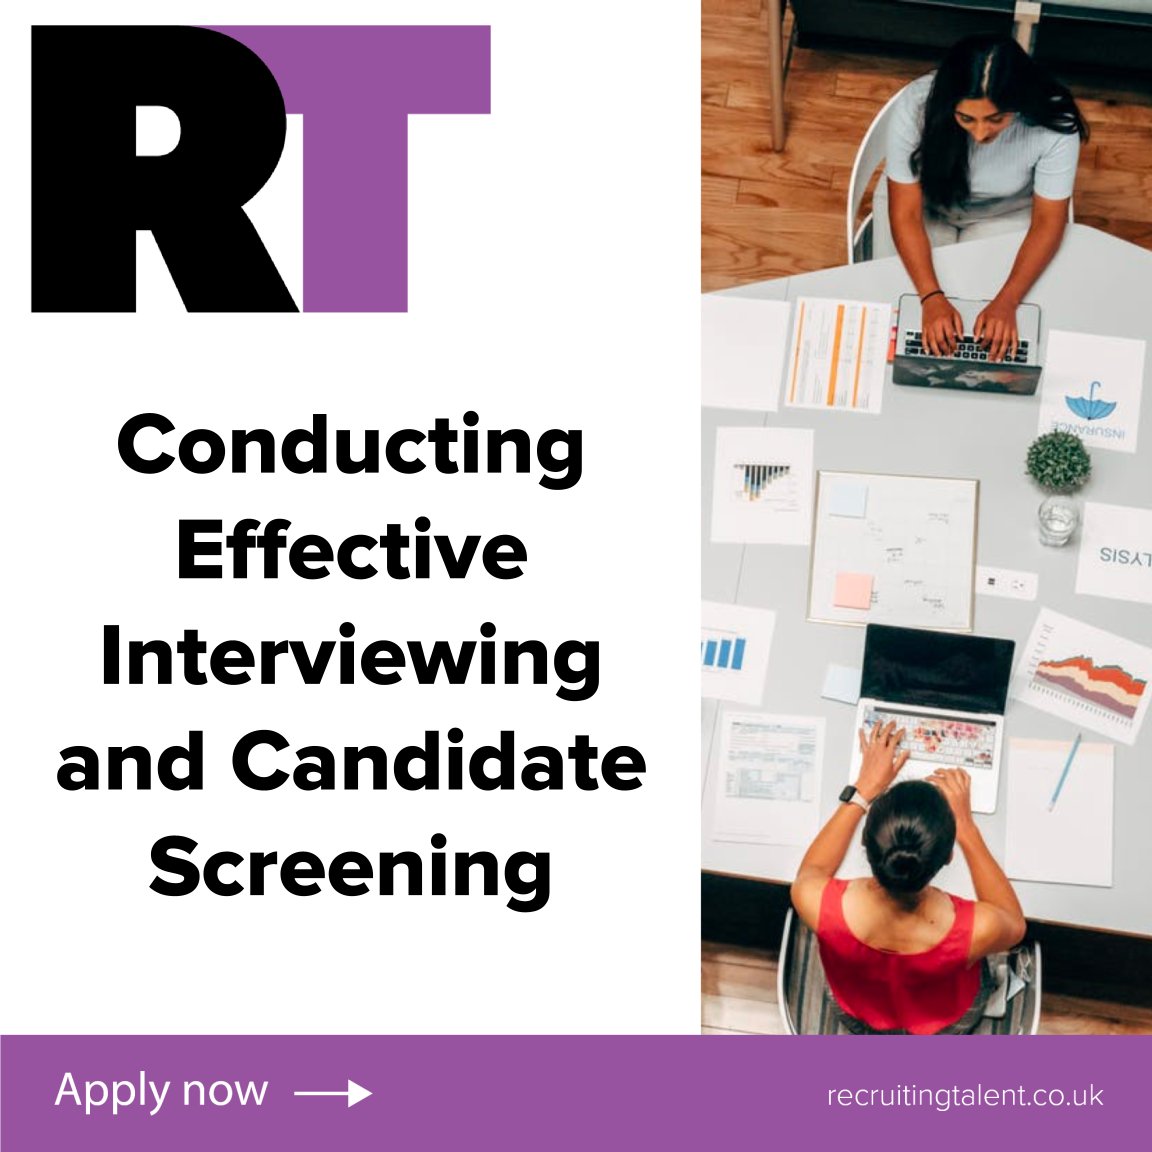 In this week's blog, we're covering the importance of having a robust interviewing process and not 'winging it' when screening candidates.
Read more here; recruitingtalent.co.uk/conducting-eff…
#recruitment #interviewprep